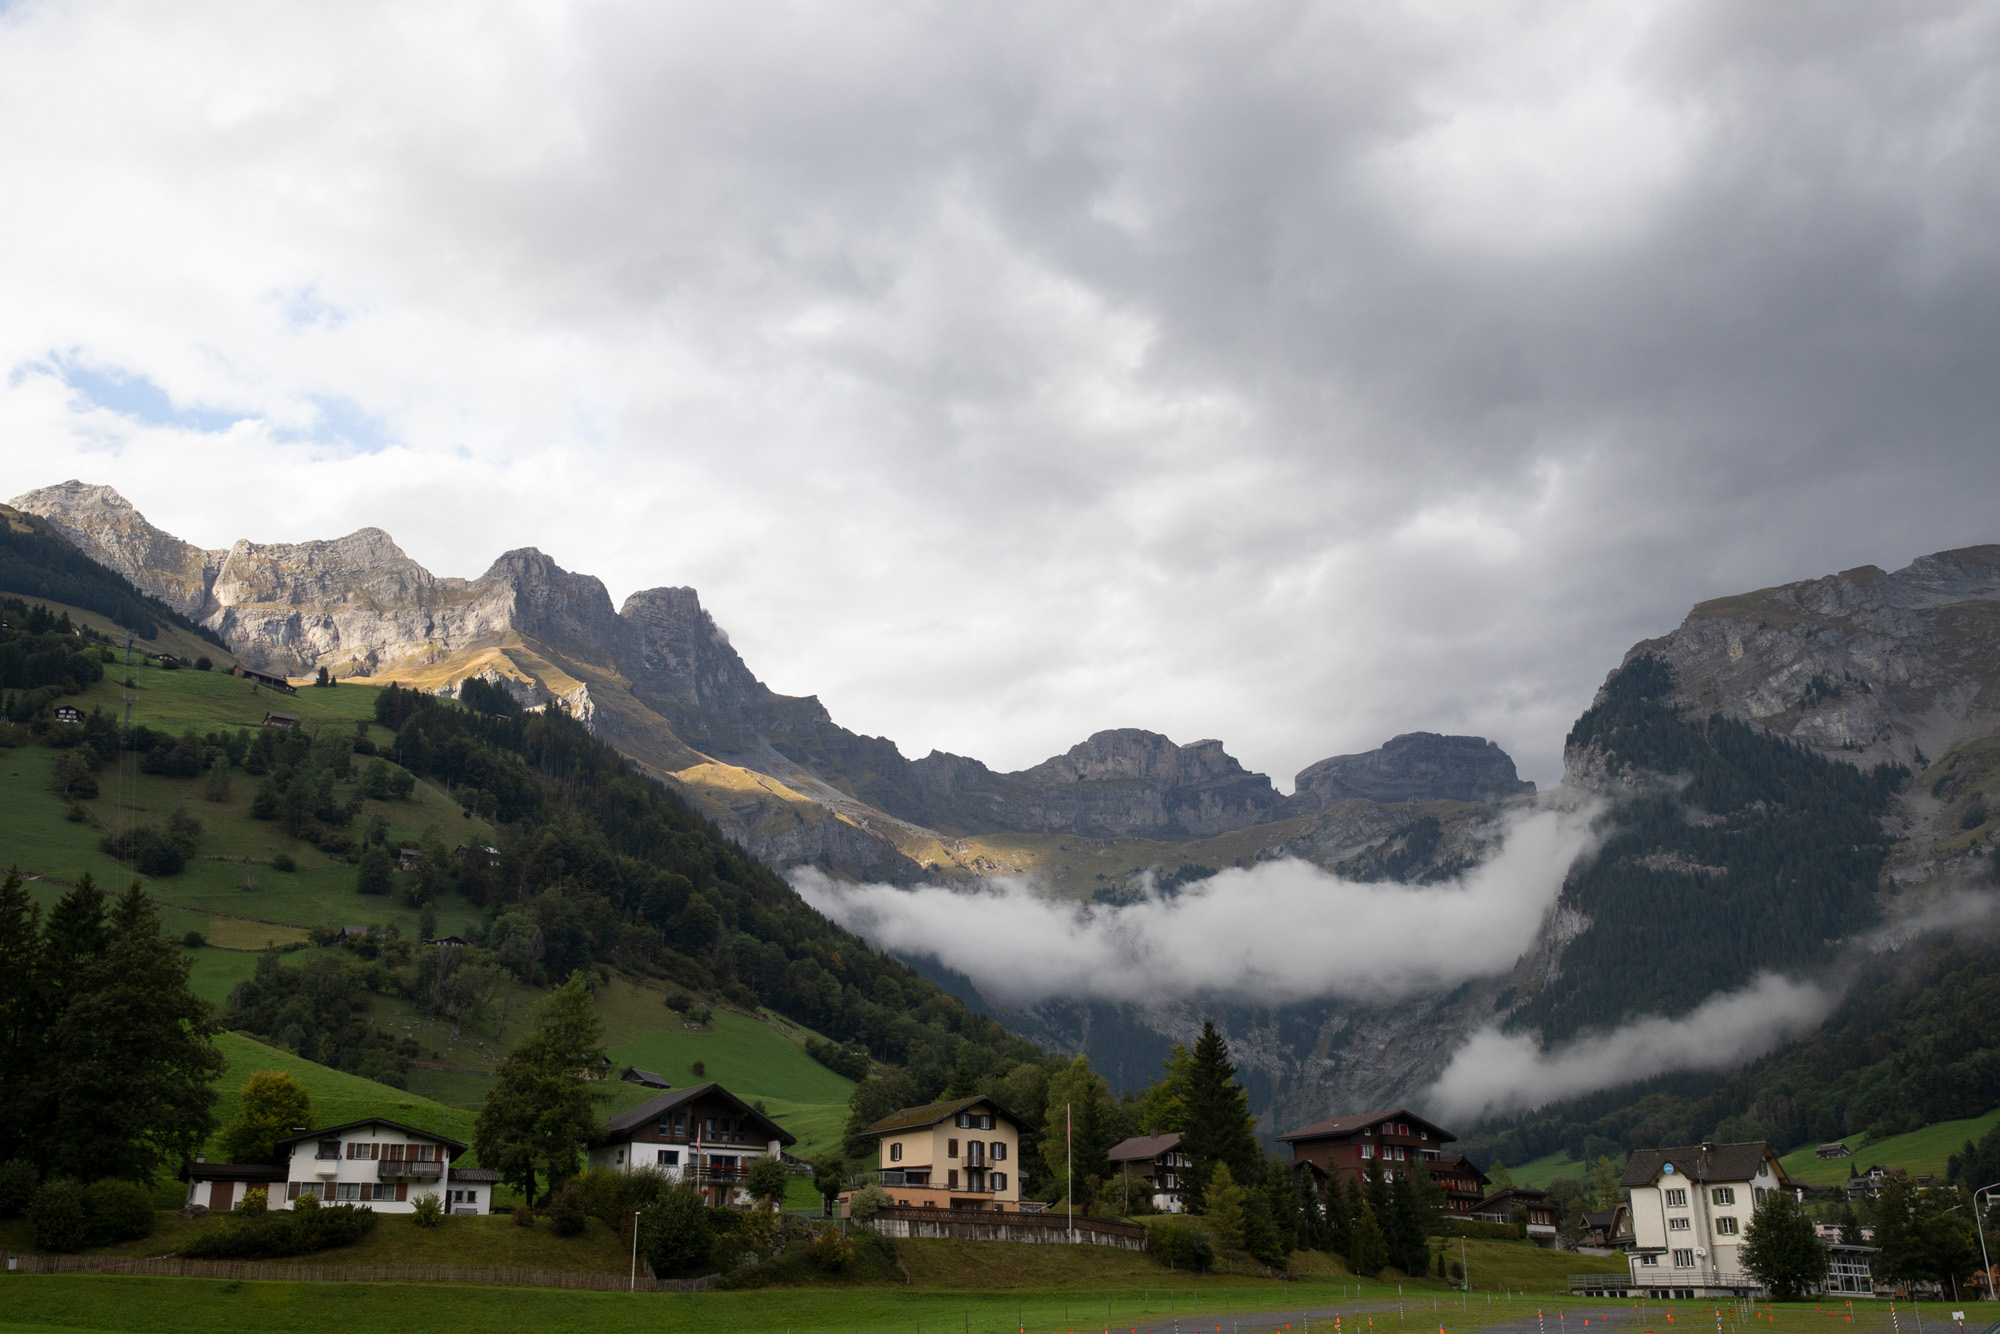 Ohio University students traveled to the town of Engelberg, Switzerland, during the afternoon off on Sept. 14, 2022, to experience a less urbanized area closer to the Alps.